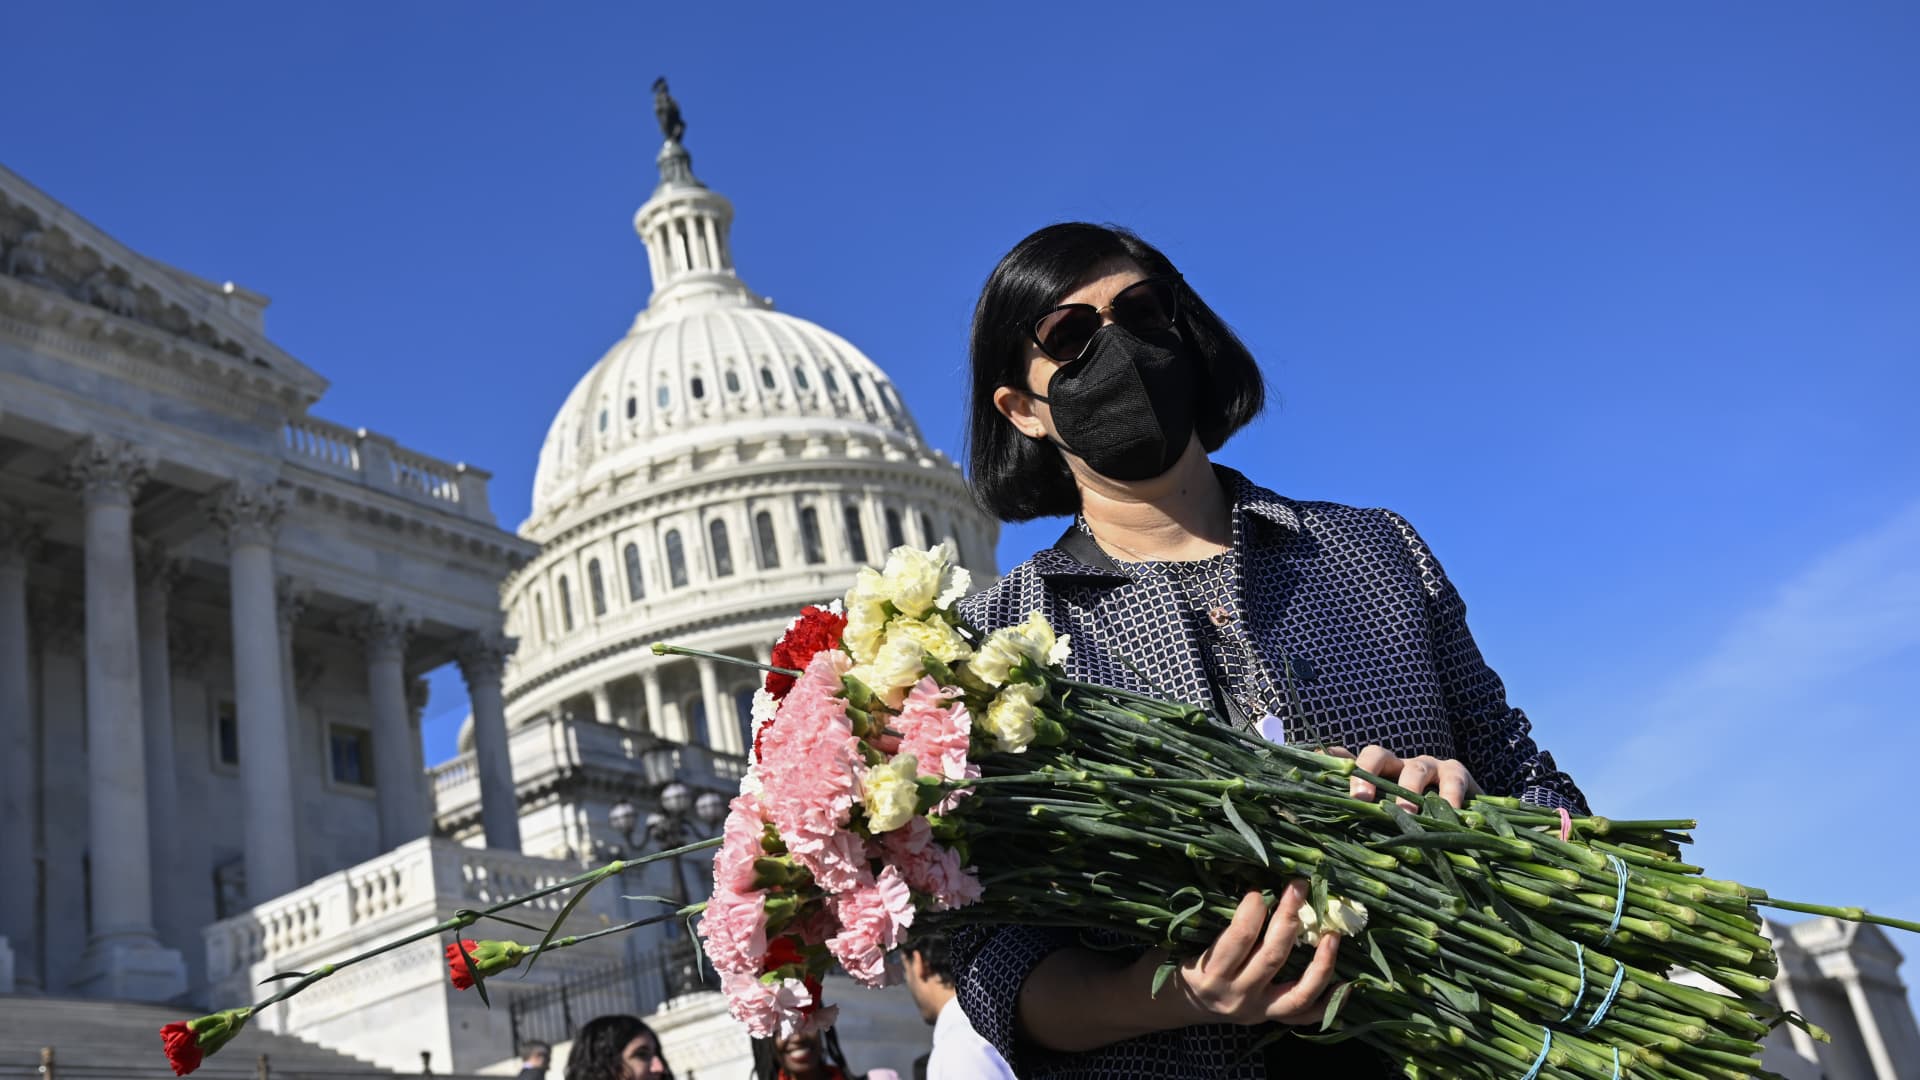 Congressional staff lay down roses and carnations on the stairs in front of the congress building for those who lost their lives in Gaza due to Israeli attacks as they unfurl banner demanding a ceasefire on November 08, 2023 in Washington D.C, United States. 